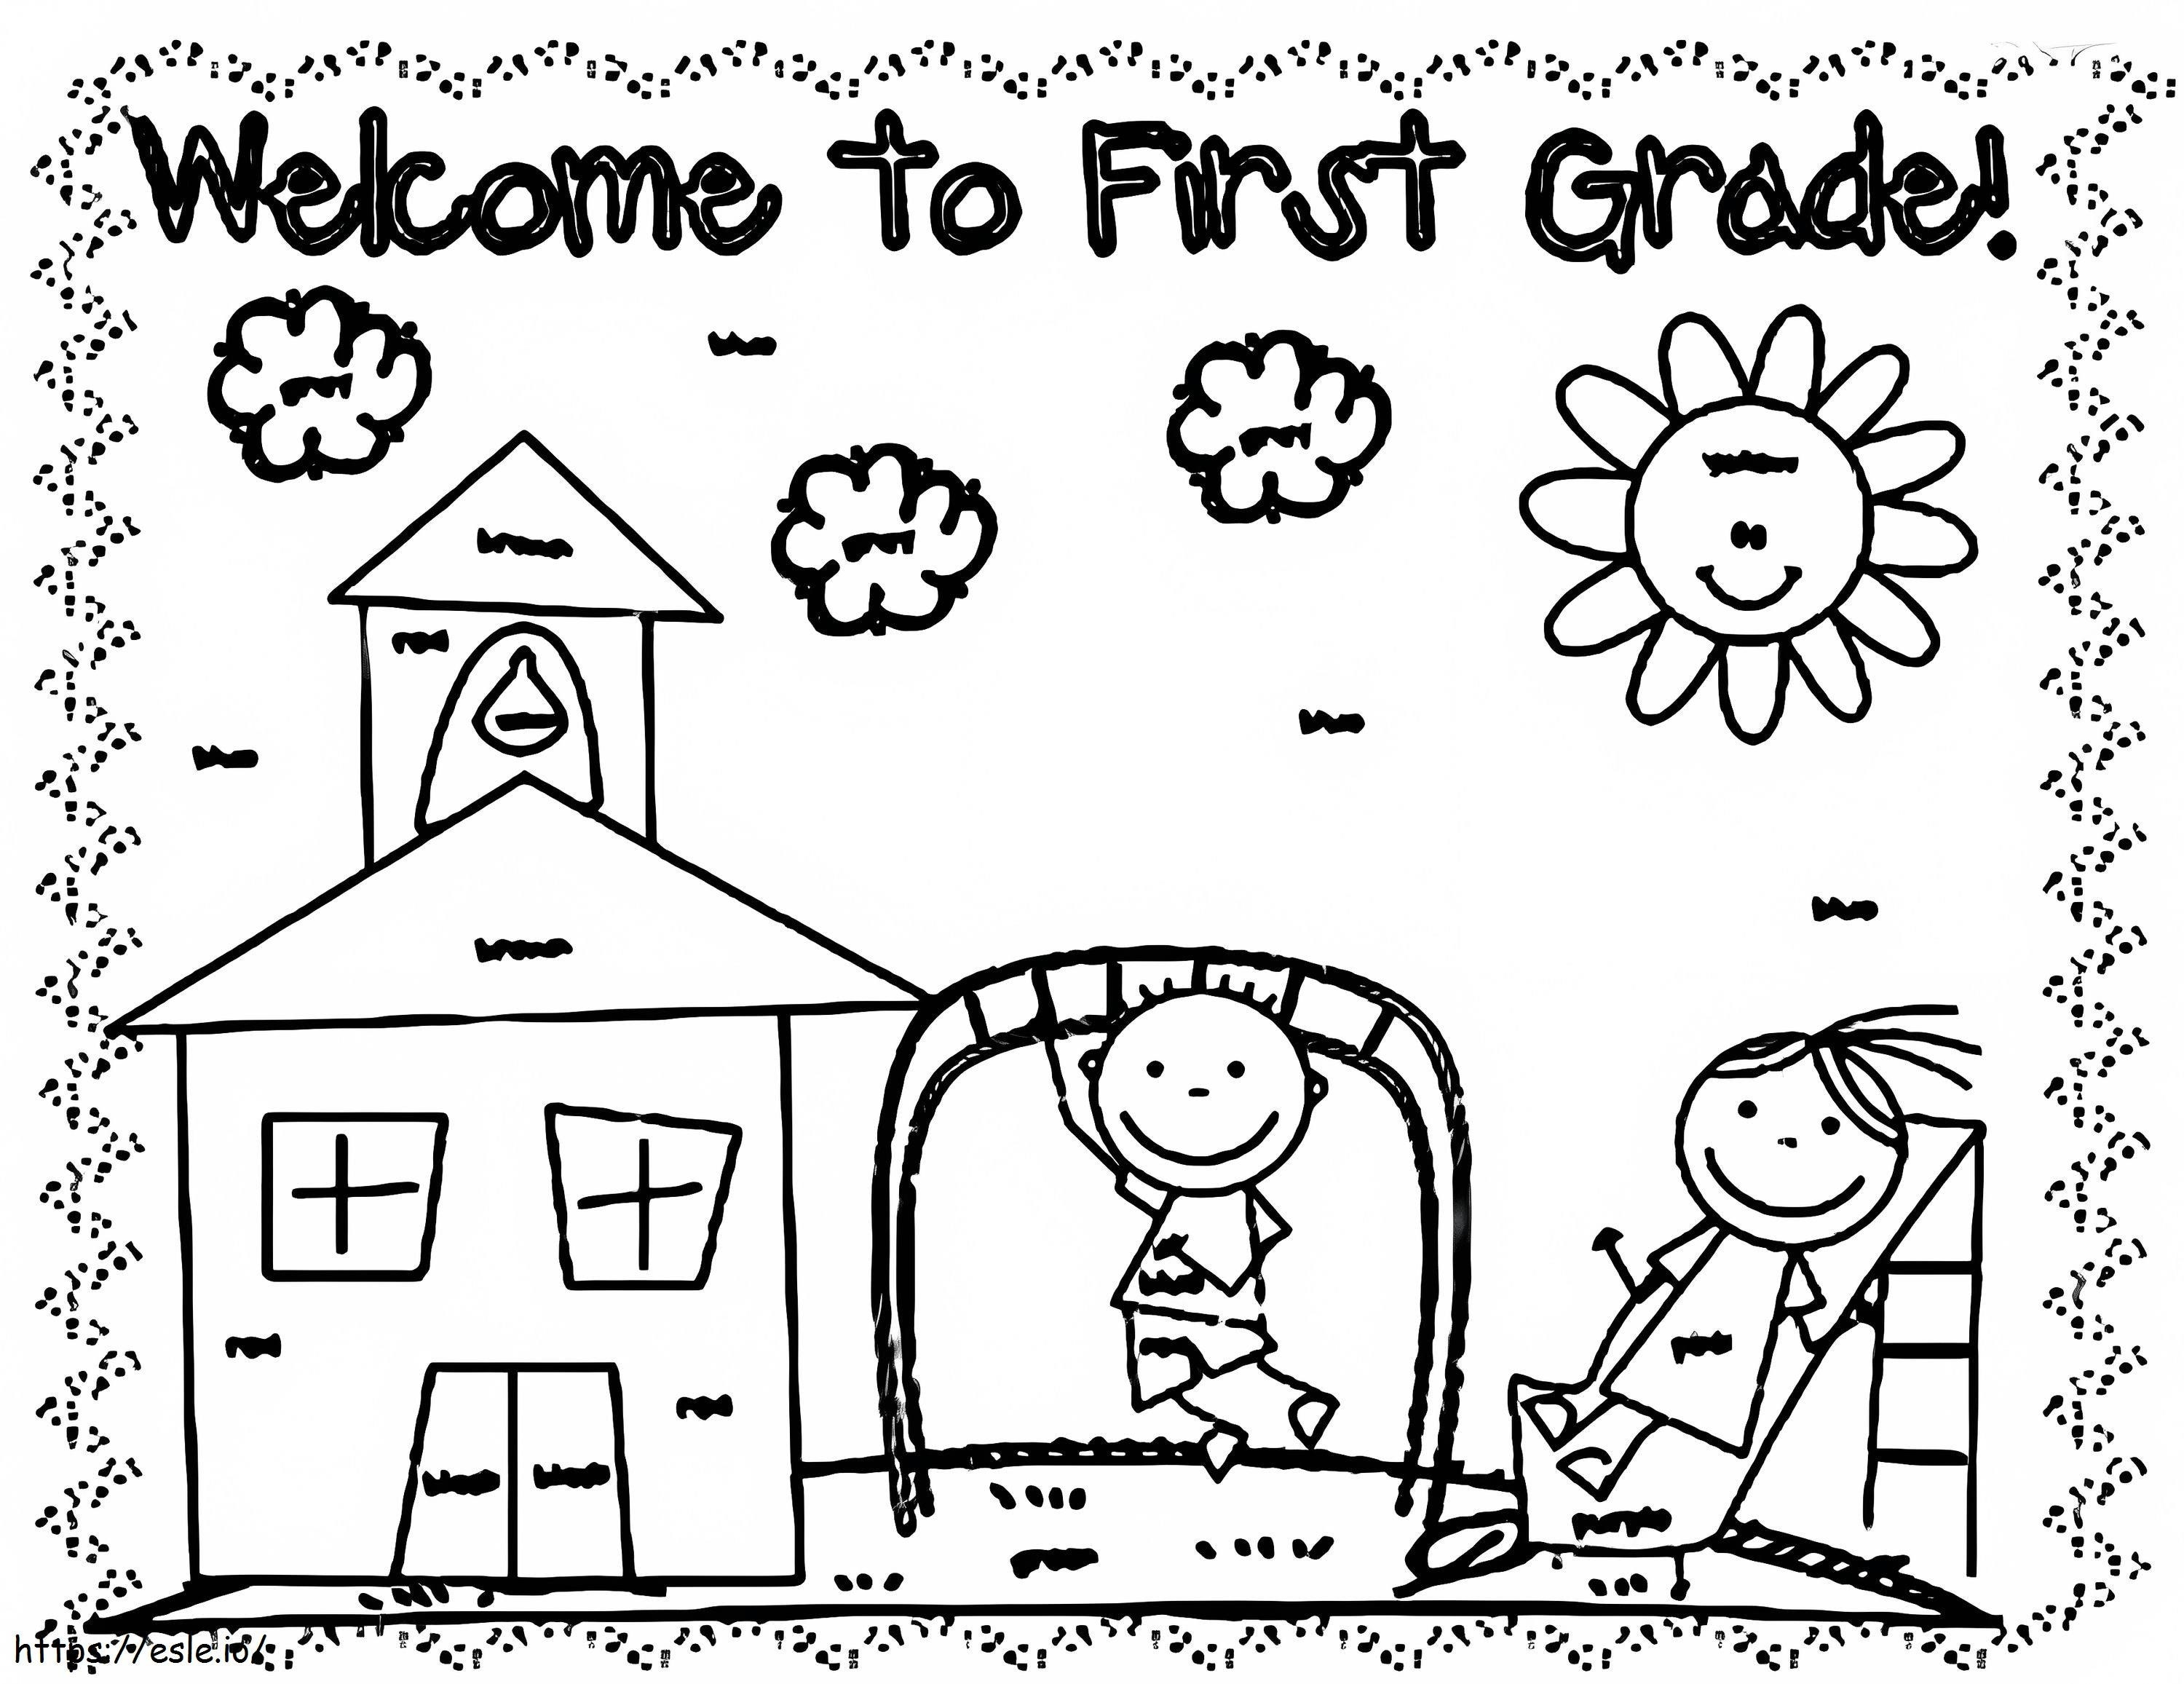 Printable Welcome To First Grade coloring page